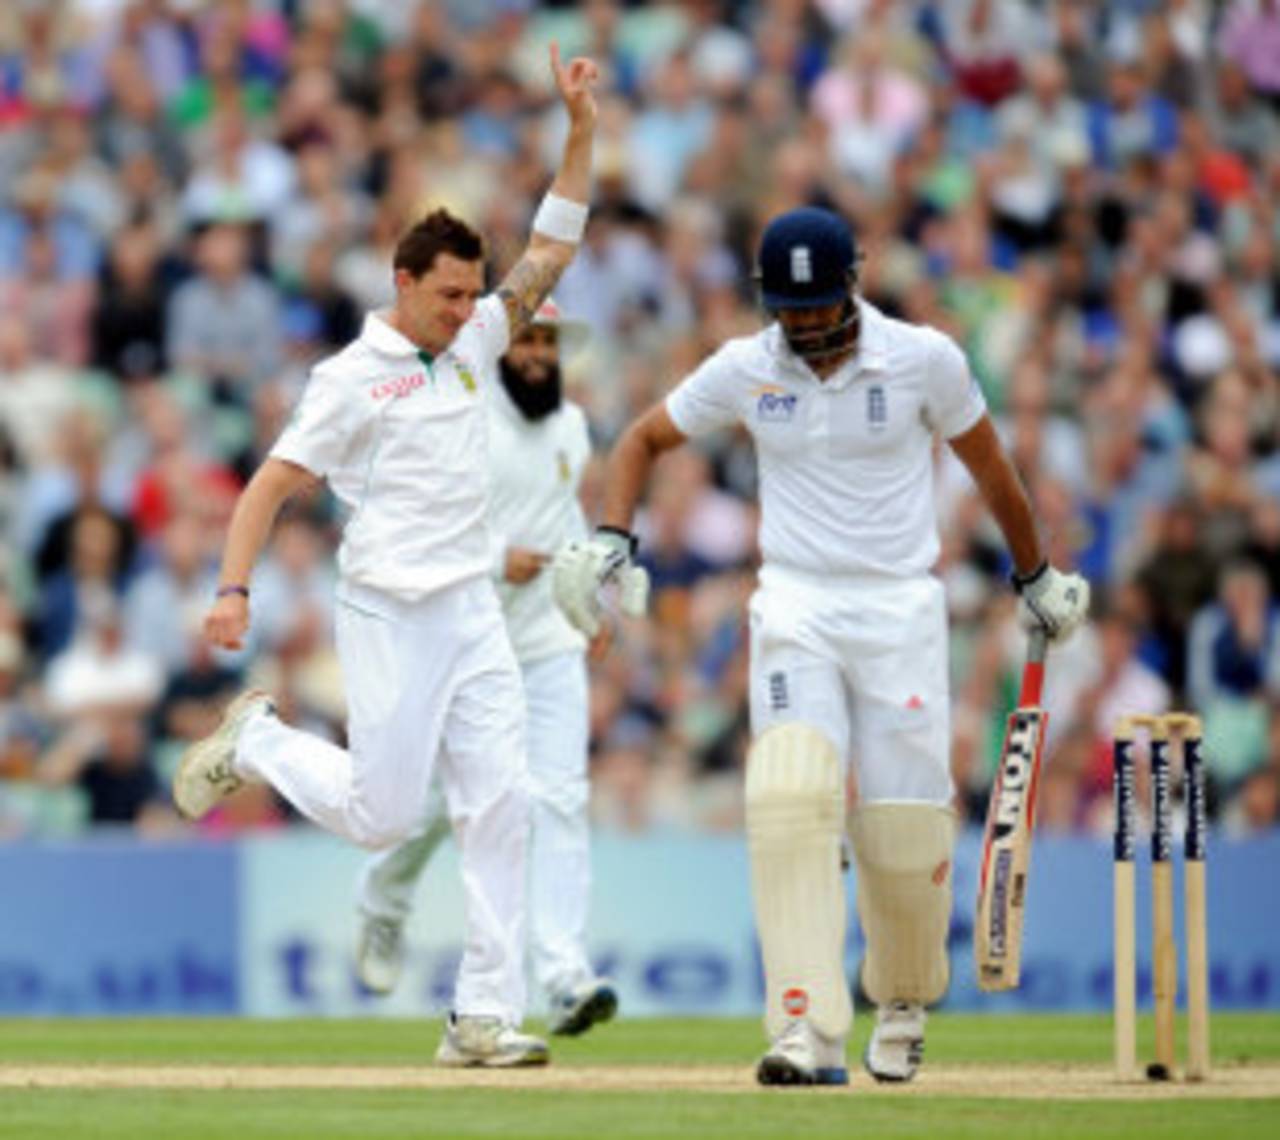 Dale Steyn had Ravi Bopara caught behind for a duck, England v South Africa, 1st Investec Test, The Oval,  2nd day, July 20, 2012